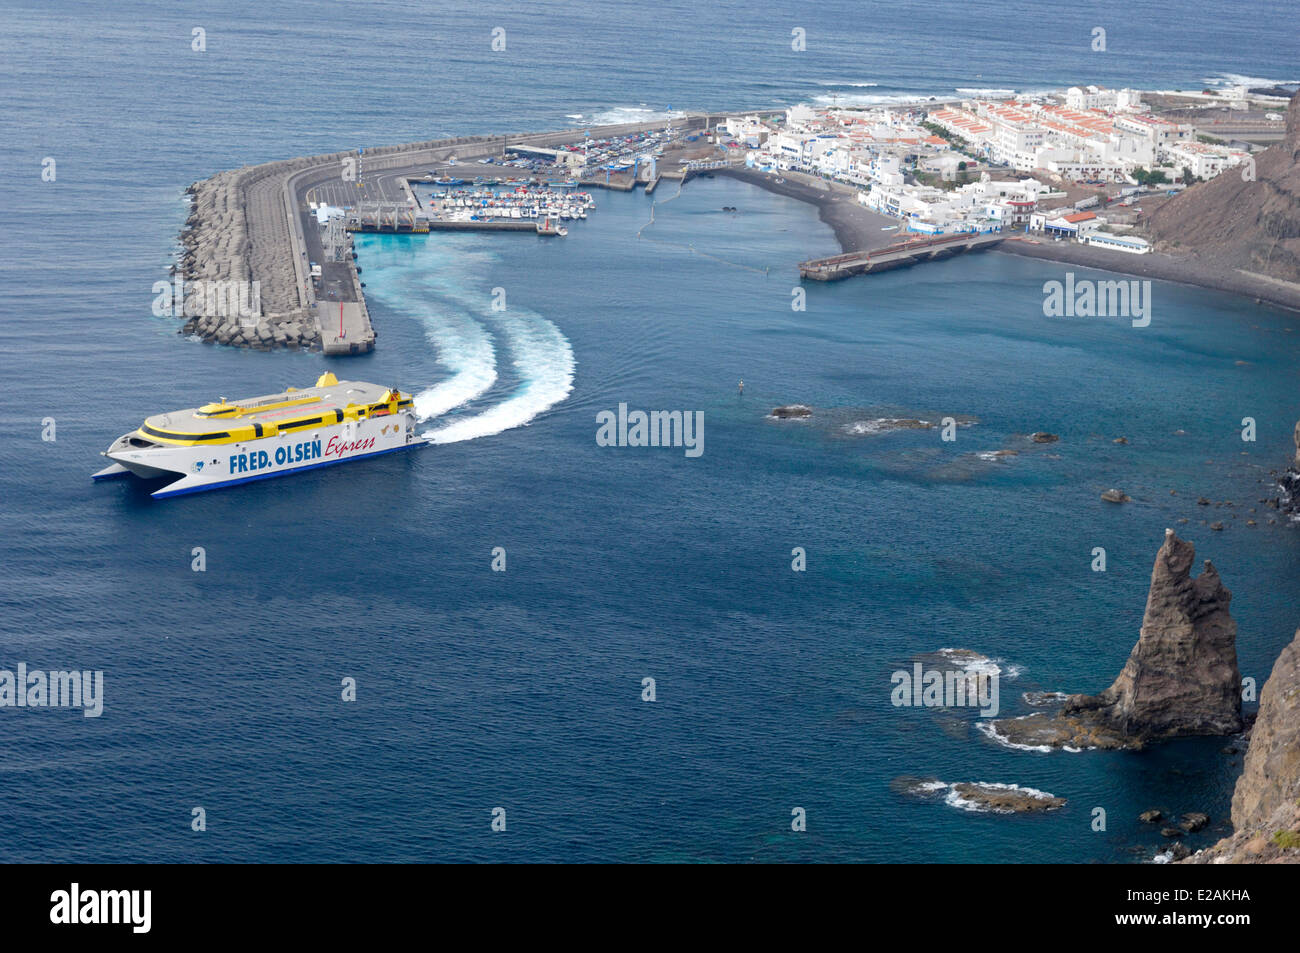 Spain, Canary Islands, Gran Canaria, Puerto de Las Nieves, ferry Fred Olsen  Express out of the port Stock Photo - Alamy